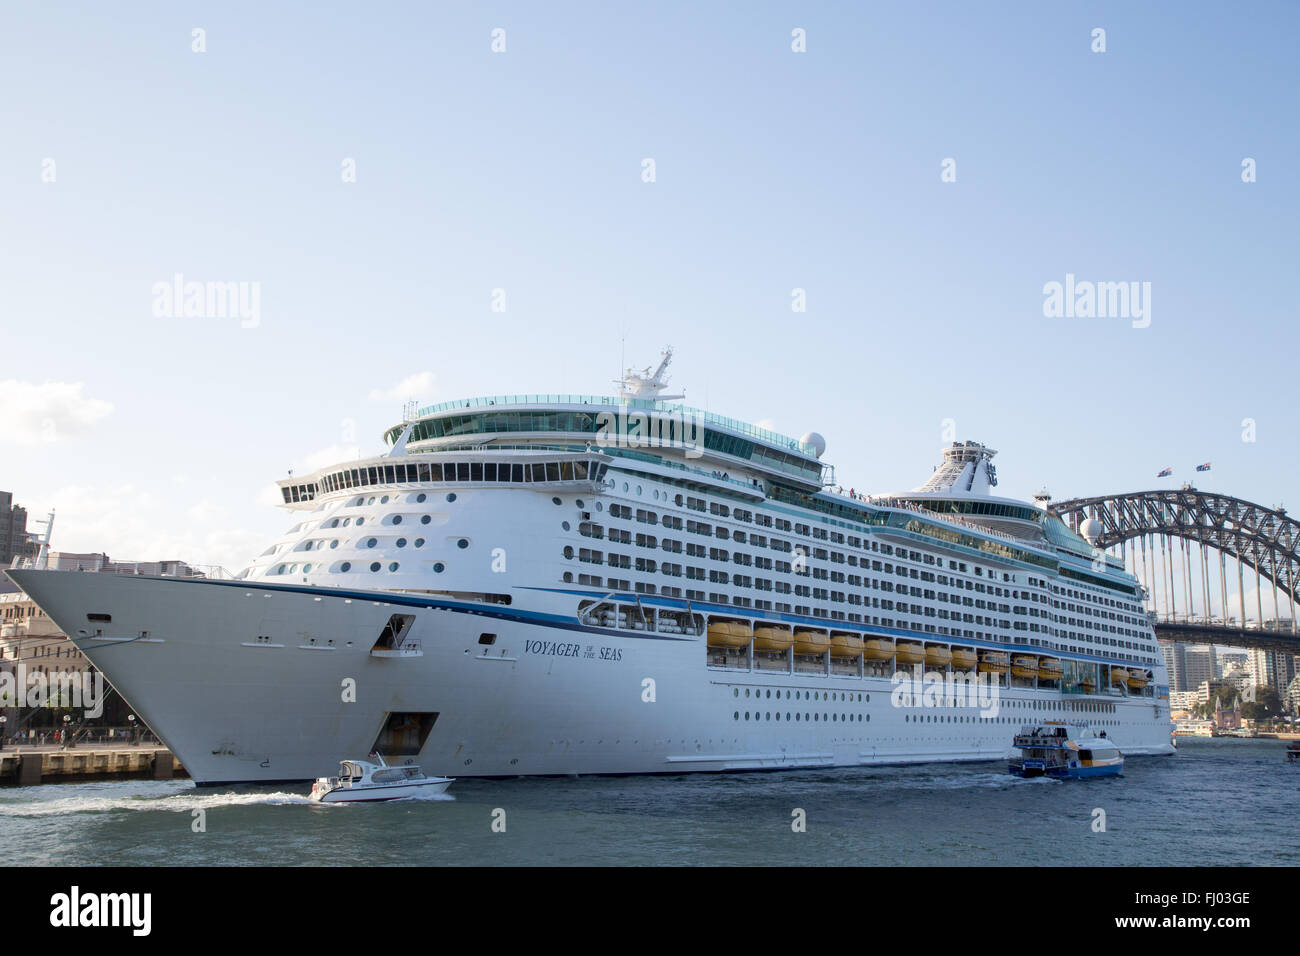 The Royal Caribbean International cruise ship Voyager of the Seas moored at the Overseas Passenger Terminal in Sydney, Australia Stock Photo